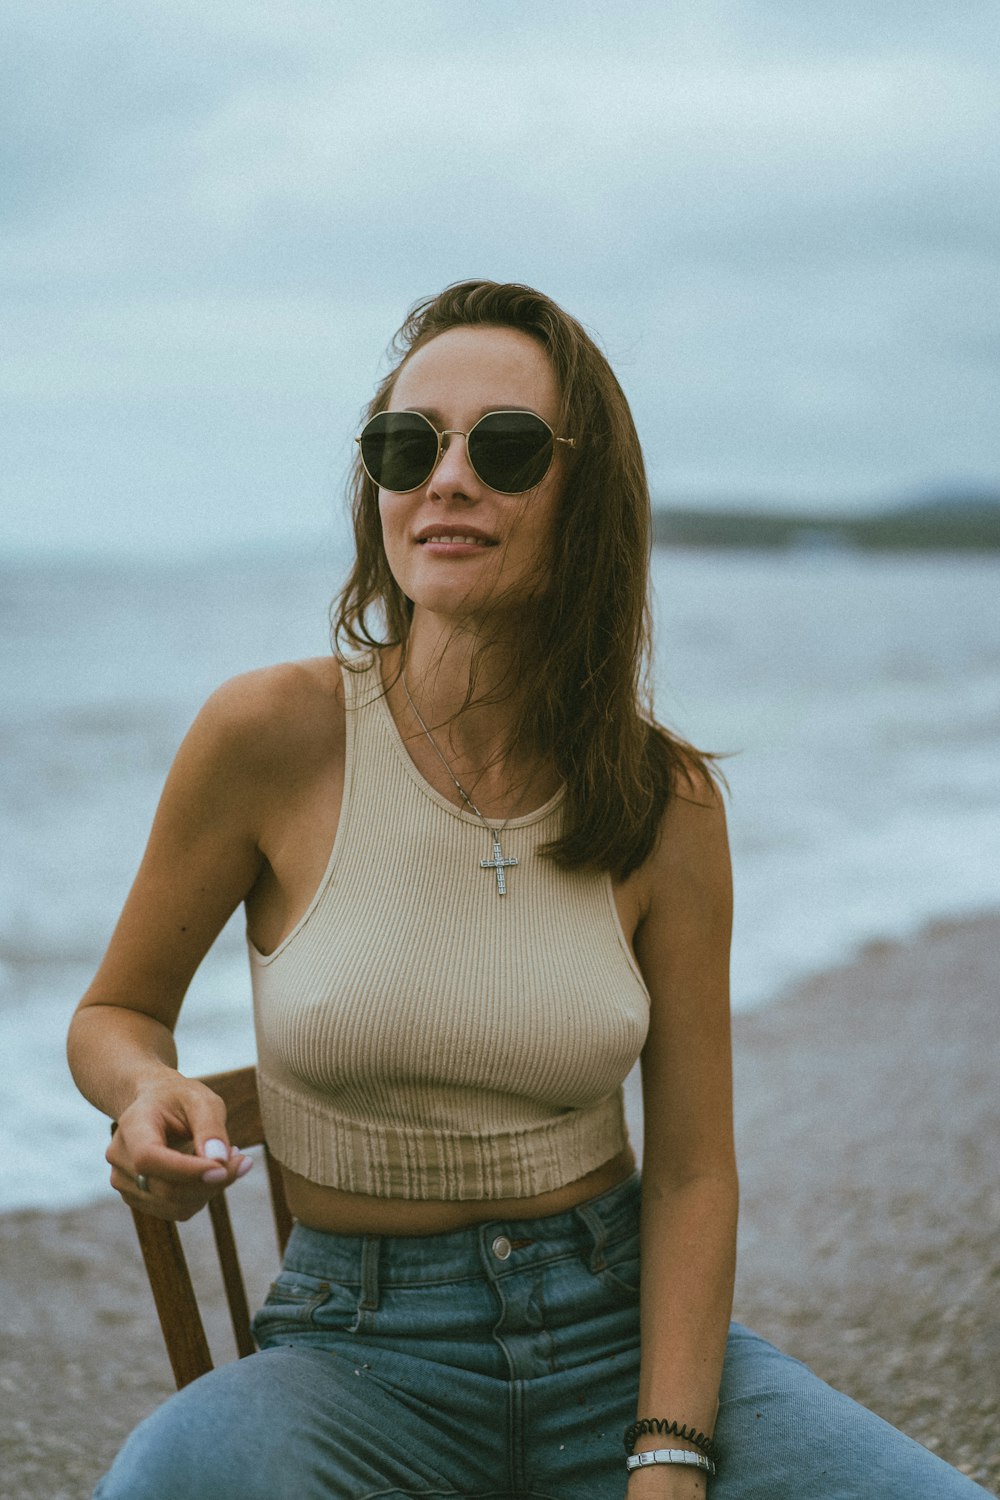 woman in white tank top wearing sunglasses standing on beach during daytime